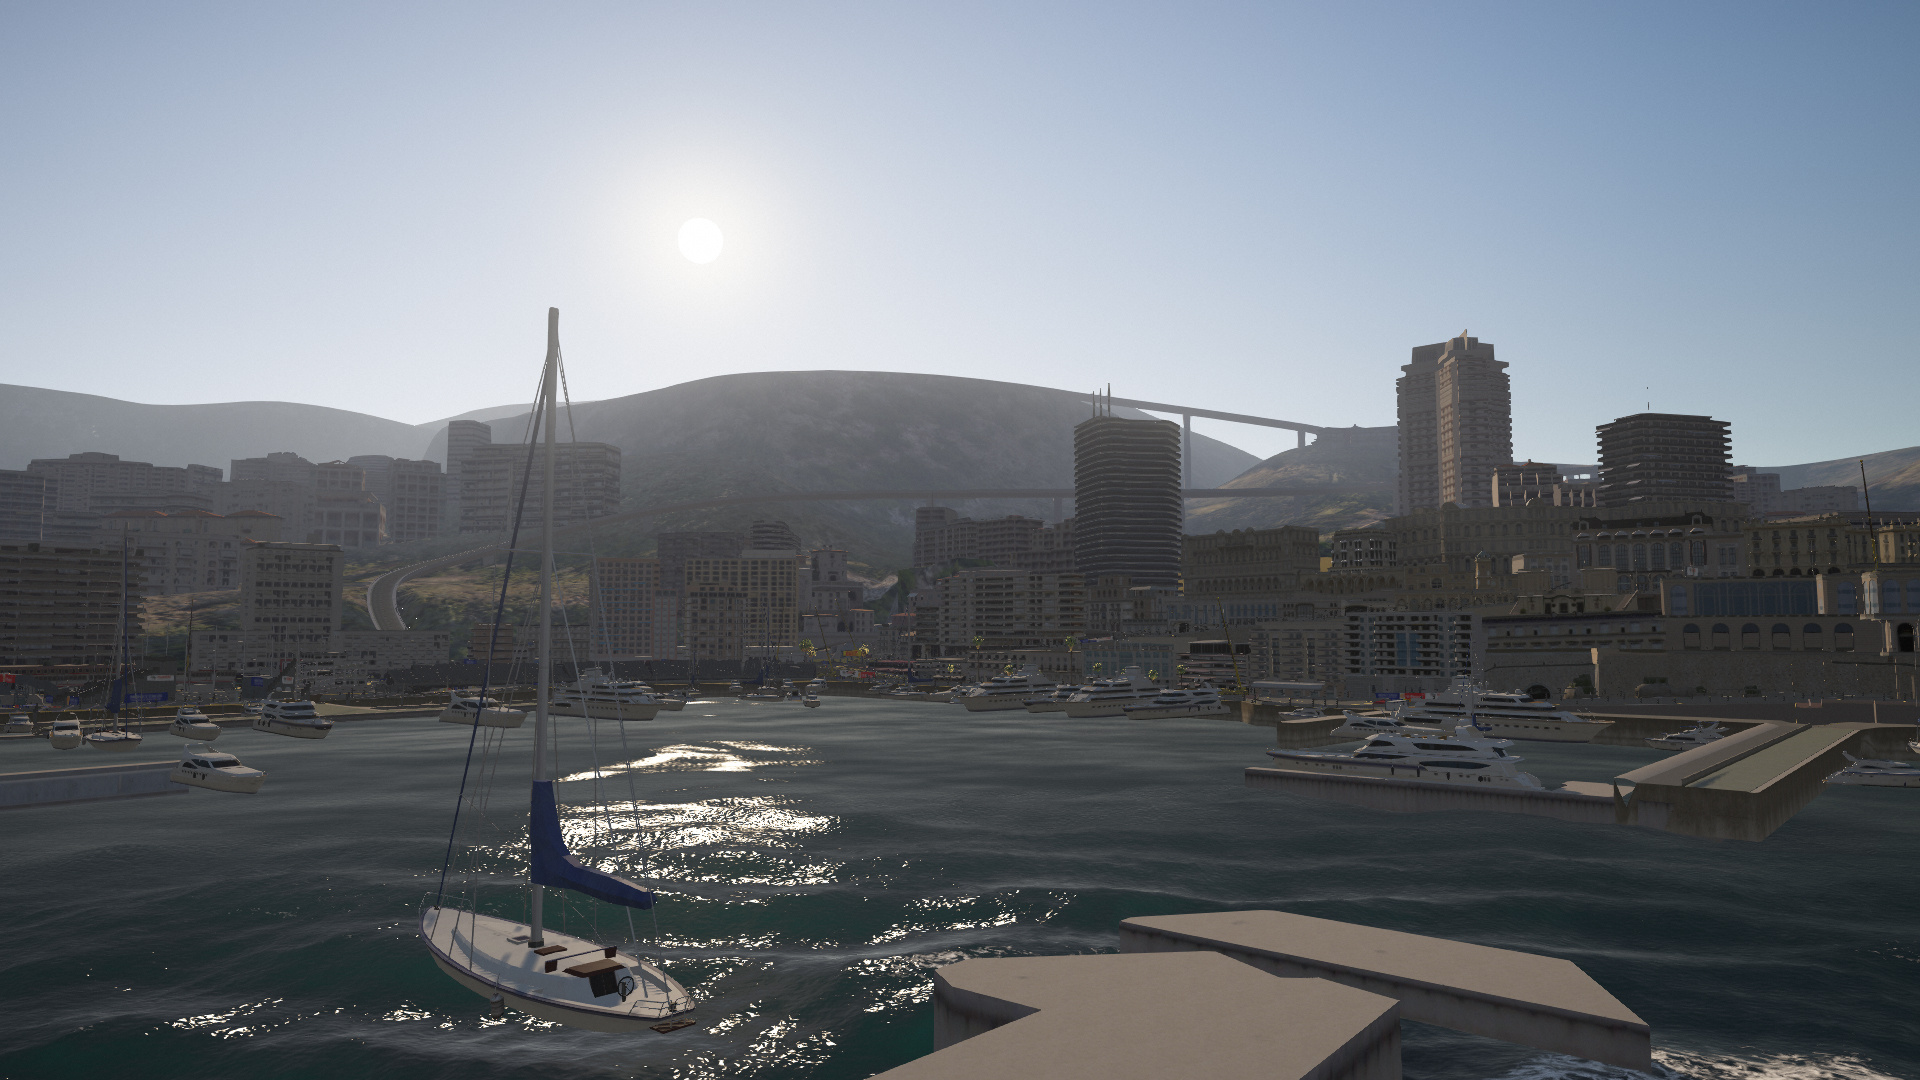 THE GTA 5 MAP ON ASSETTO CORSA IS HERE!, Assetto Corsa